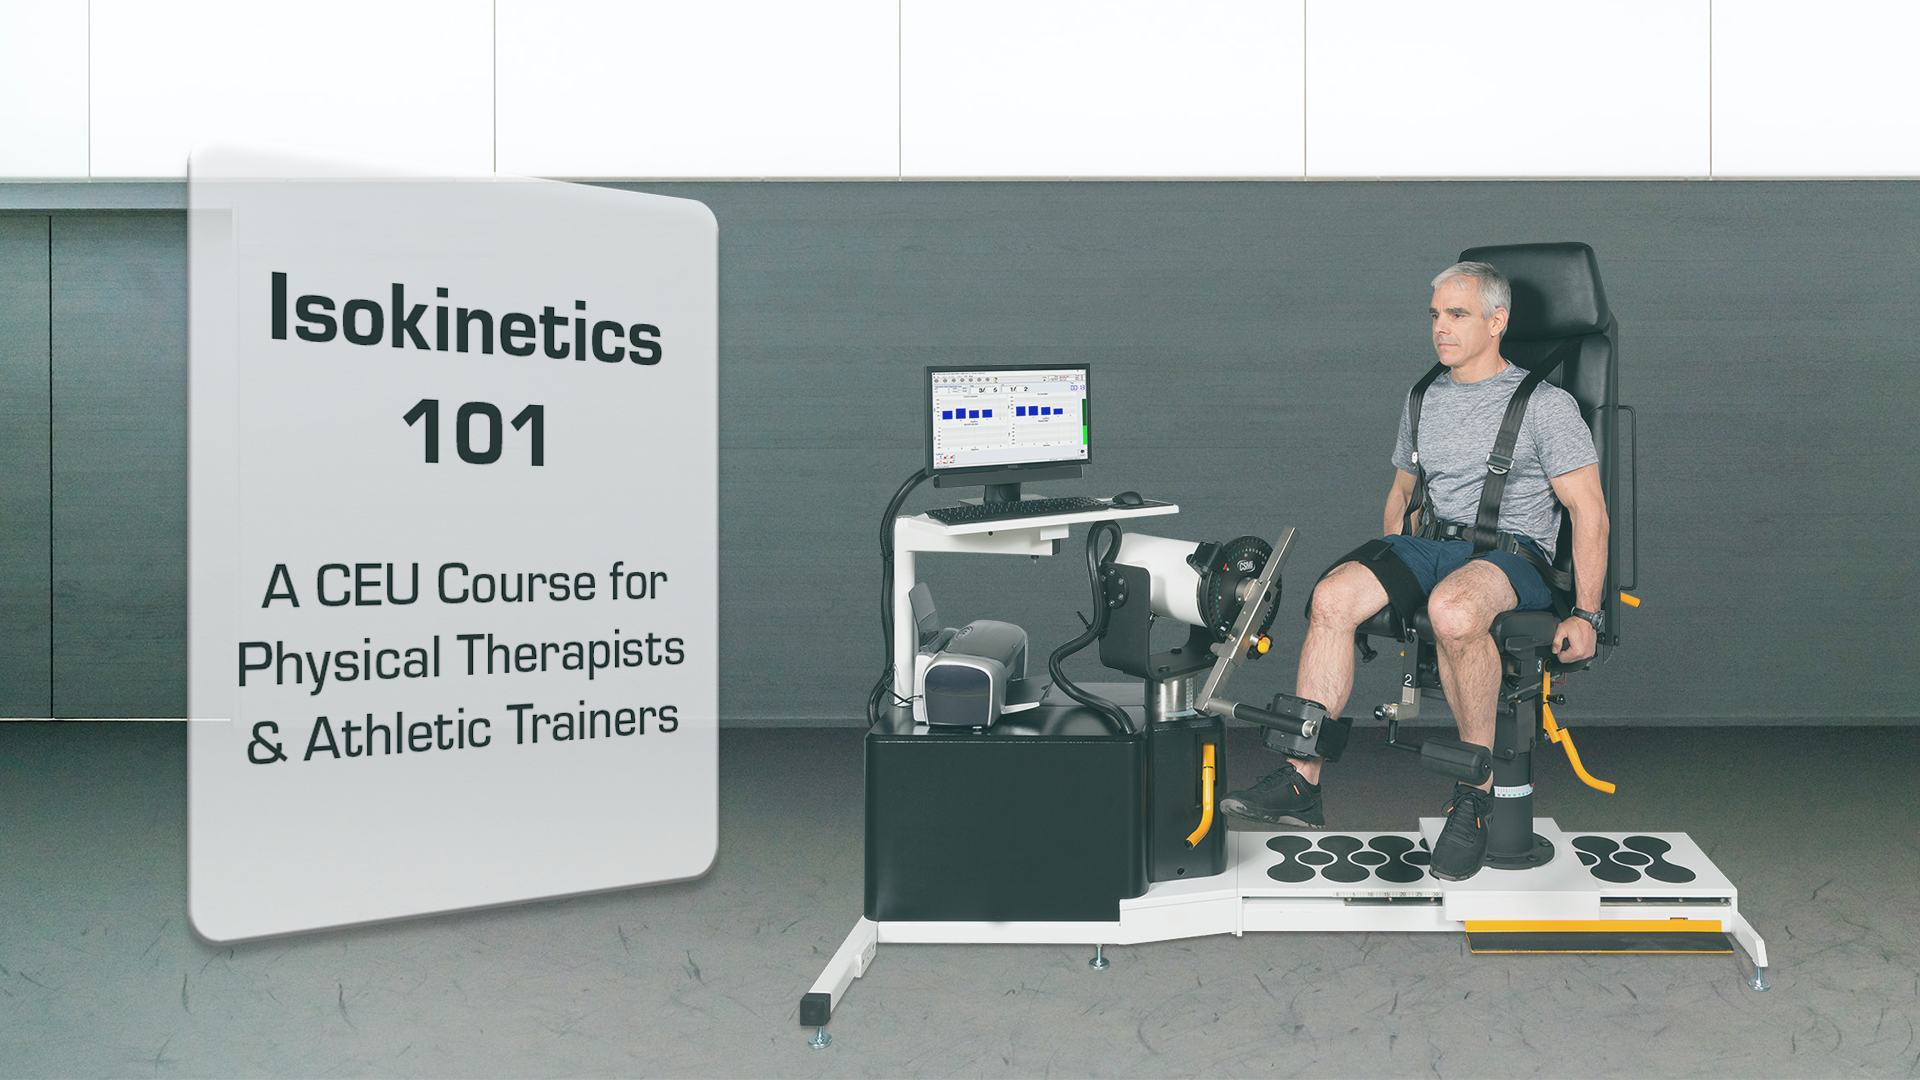 isokinetics 101 ceu for athletic trainers and physical therapists course preview image